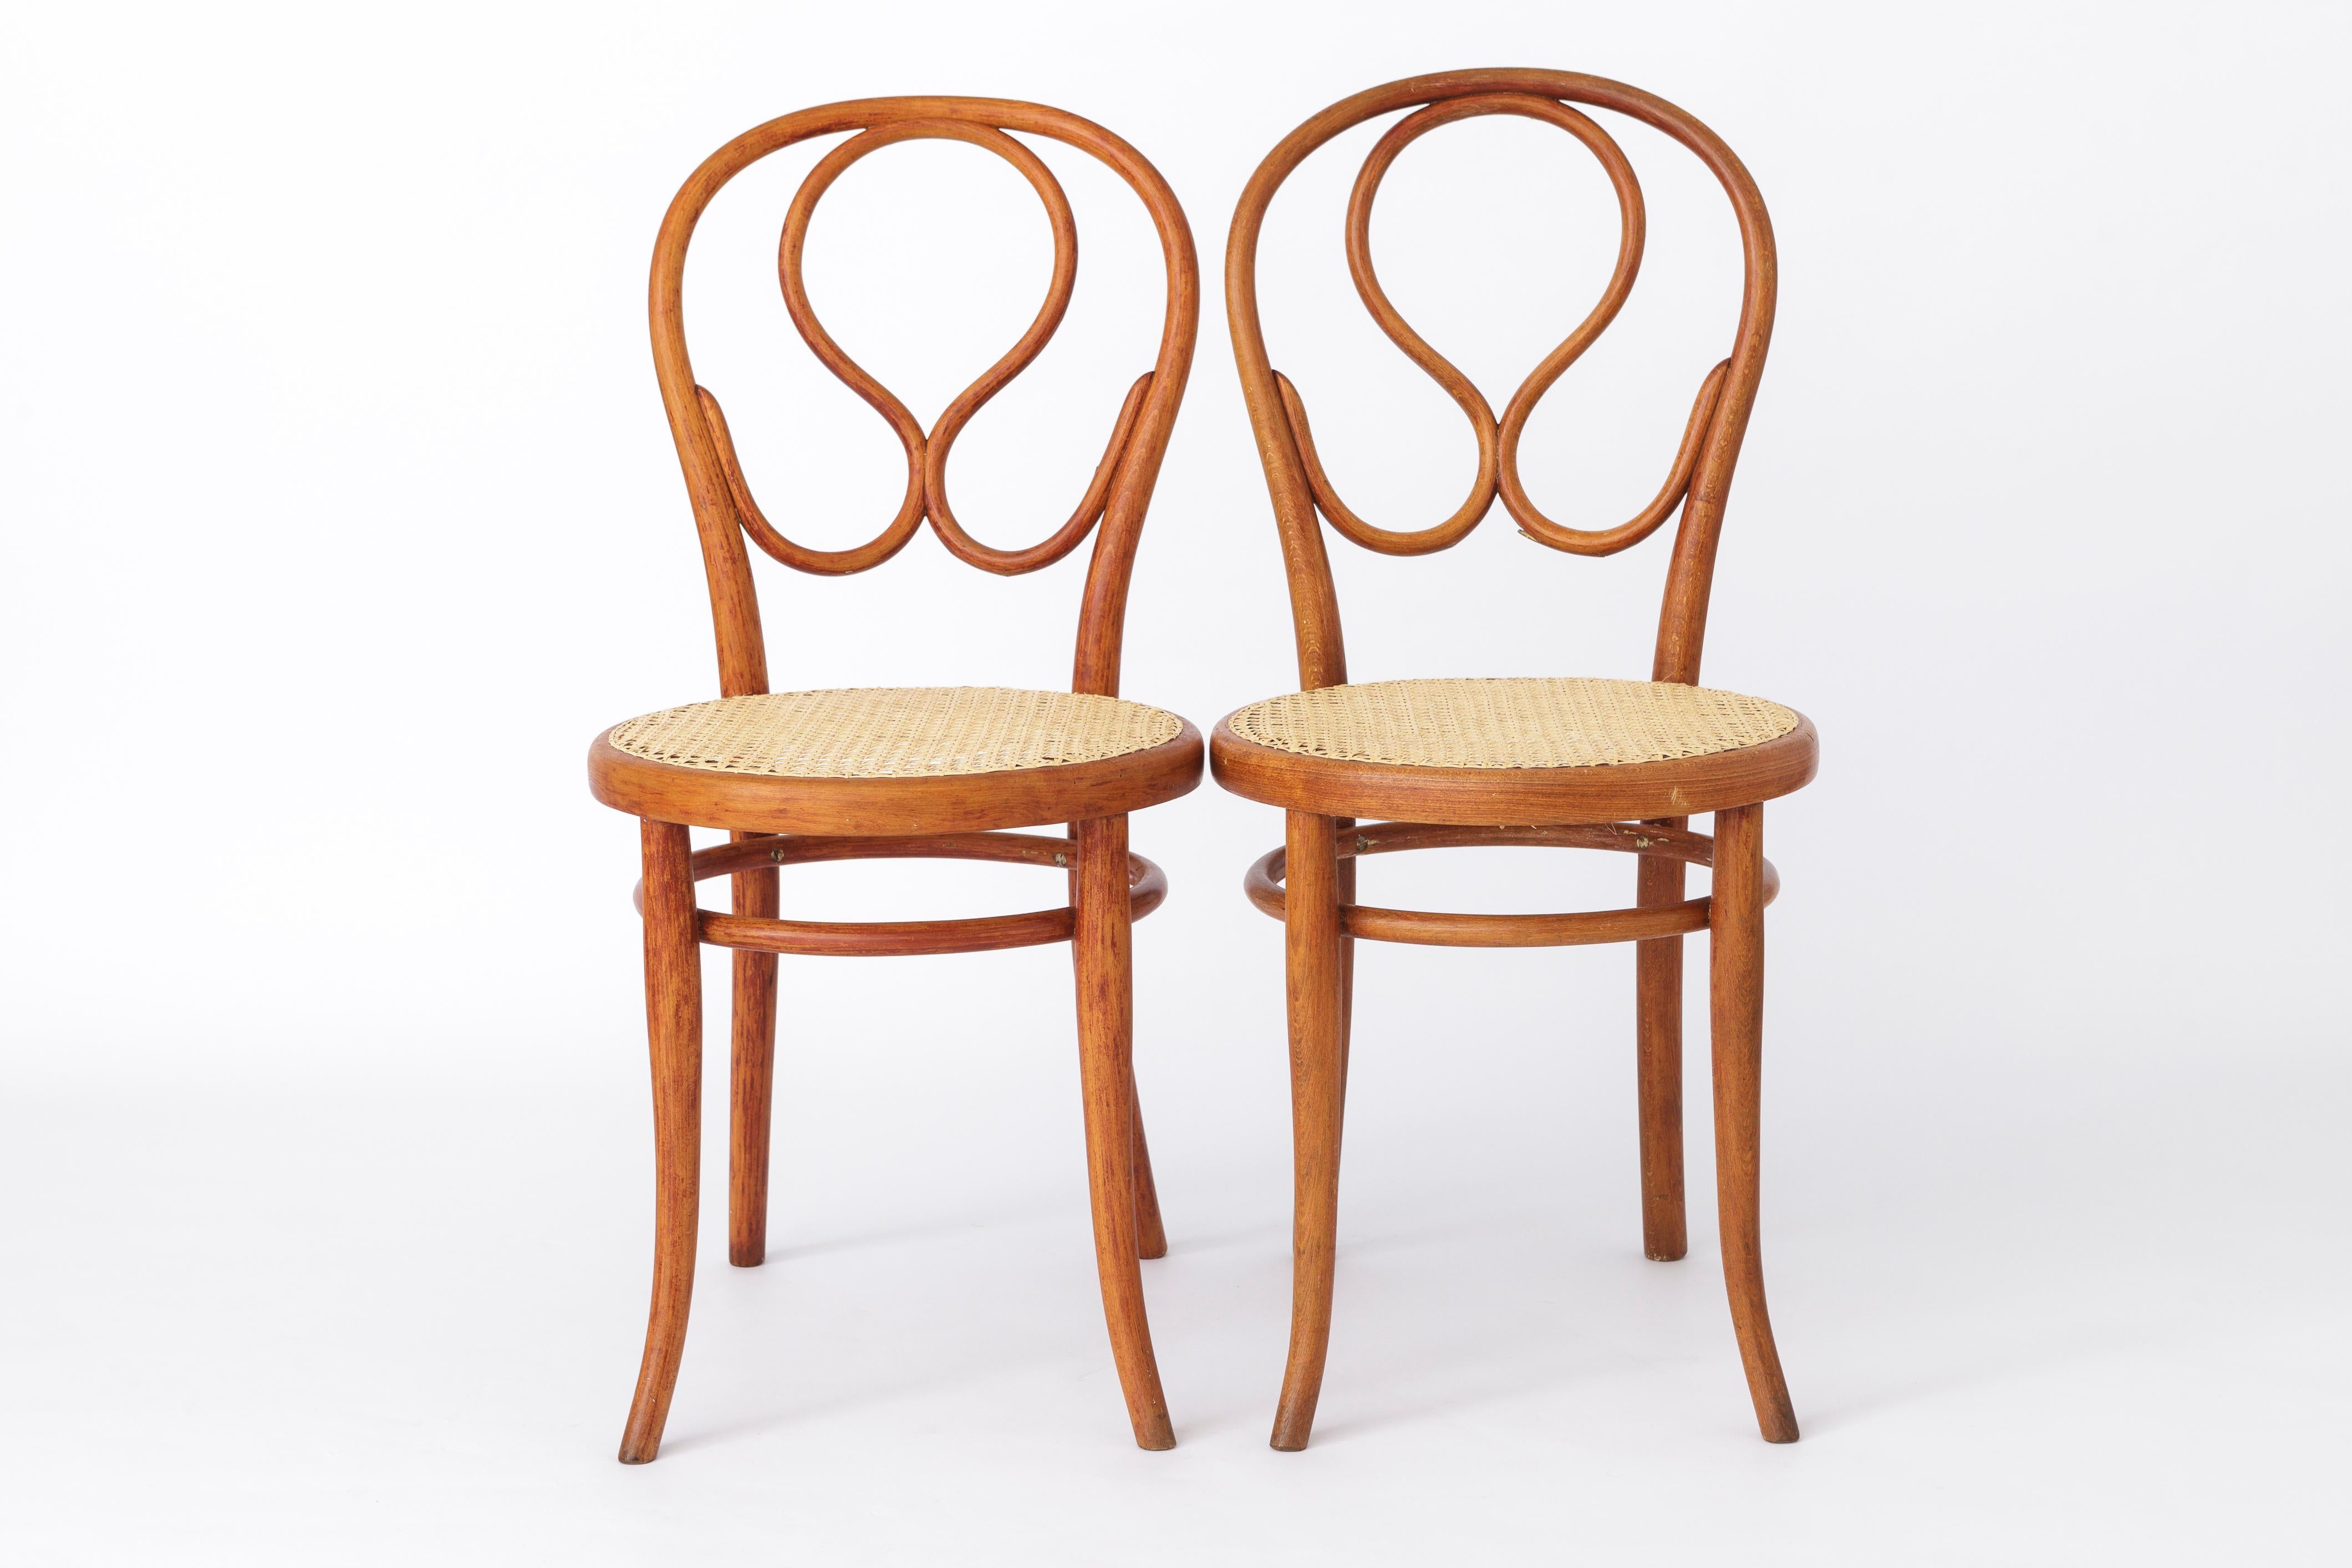 Polished Pair Thonet Cafe-Chairs approx. 1880s - Bentwood, Cane seat weaving